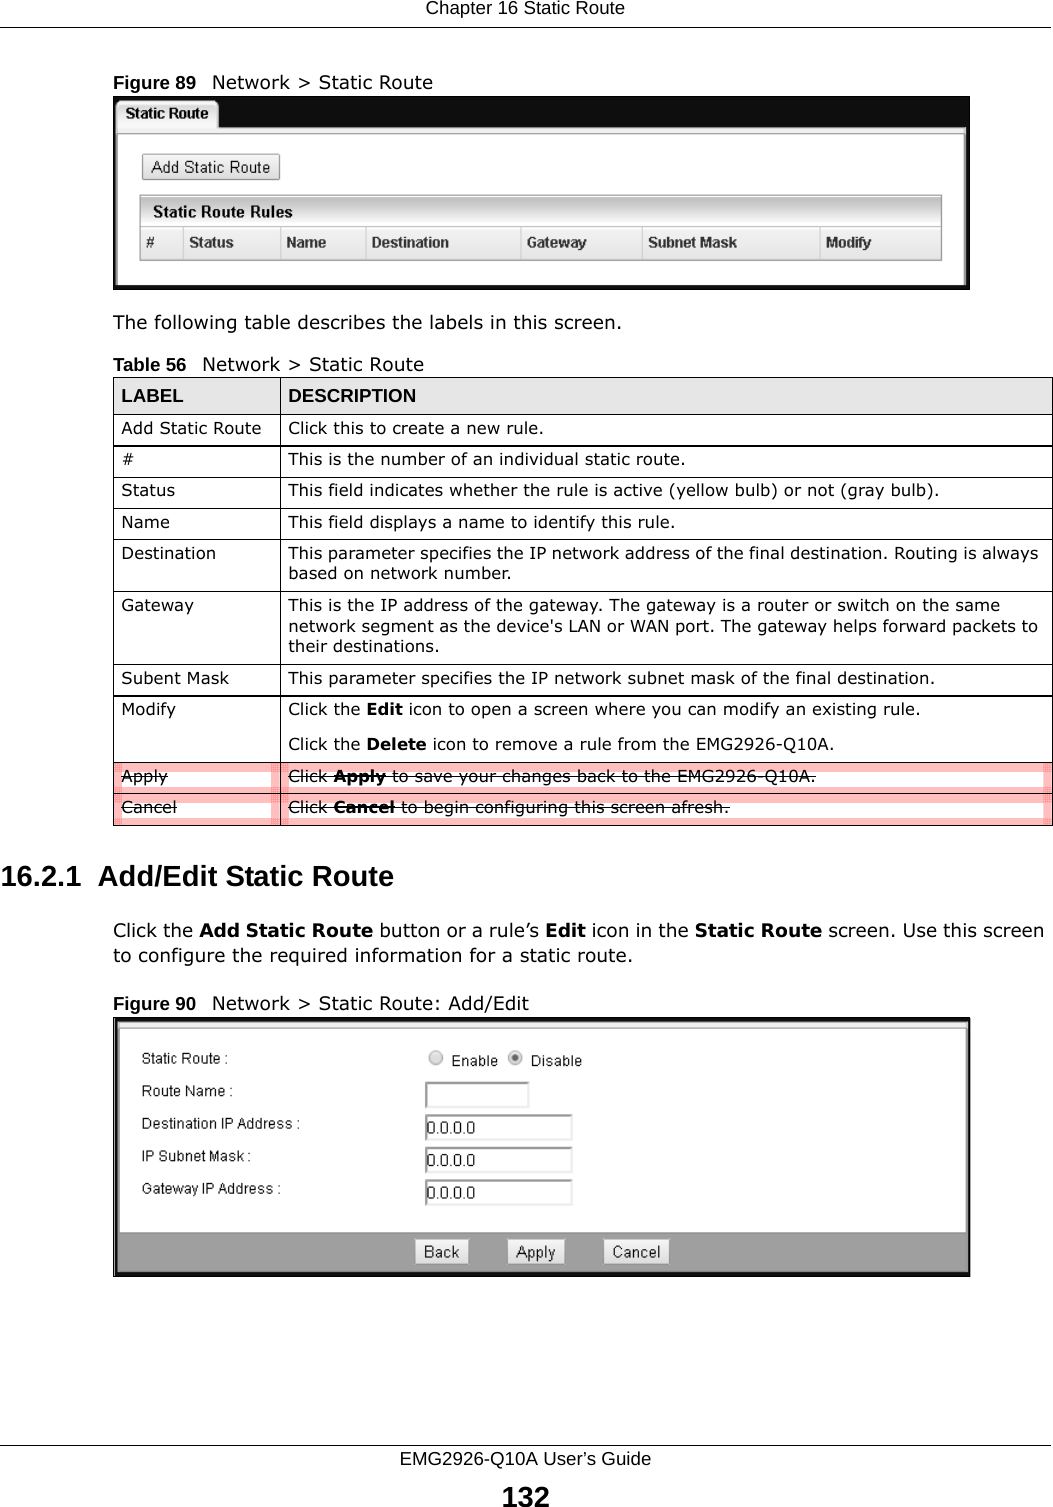 Chapter 16 Static RouteEMG2926-Q10A User’s Guide132Figure 89   Network &gt; Static RouteThe following table describes the labels in this screen. 16.2.1  Add/Edit Static Route  Click the Add Static Route button or a rule’s Edit icon in the Static Route screen. Use this screen to configure the required information for a static route. Figure 90   Network &gt; Static Route: Add/Edit Table 56   Network &gt; Static RouteLABEL DESCRIPTIONAdd Static Route Click this to create a new rule.#This is the number of an individual static route.Status This field indicates whether the rule is active (yellow bulb) or not (gray bulb).Name This field displays a name to identify this rule.Destination This parameter specifies the IP network address of the final destination. Routing is always based on network number. Gateway This is the IP address of the gateway. The gateway is a router or switch on the same network segment as the device&apos;s LAN or WAN port. The gateway helps forward packets to their destinations.Subent Mask This parameter specifies the IP network subnet mask of the final destination.Modify Click the Edit icon to open a screen where you can modify an existing rule. Click the Delete icon to remove a rule from the EMG2926-Q10A.Apply Click Apply to save your changes back to the EMG2926-Q10A.Cancel Click Cancel to begin configuring this screen afresh.